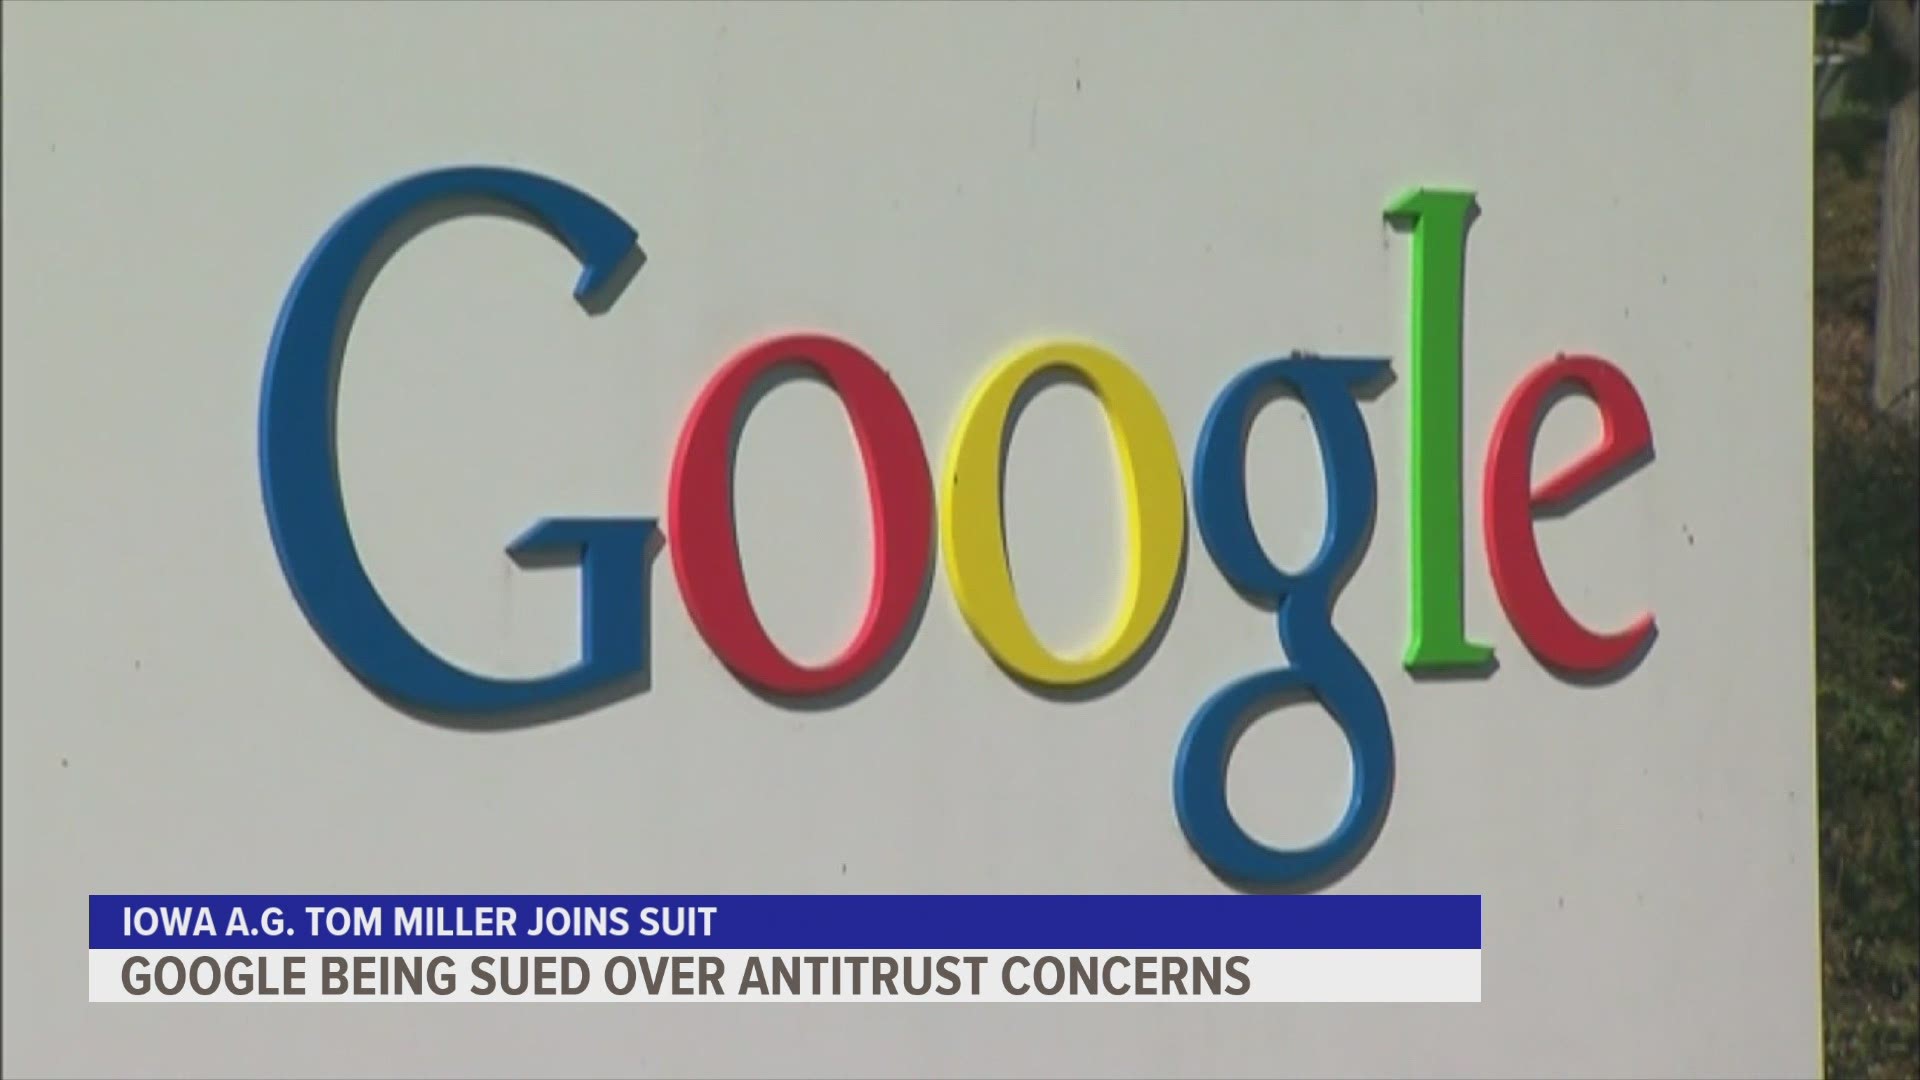 The complaint contends Google has worked to ensure it distributes more than 90% of the apps on Android devices.